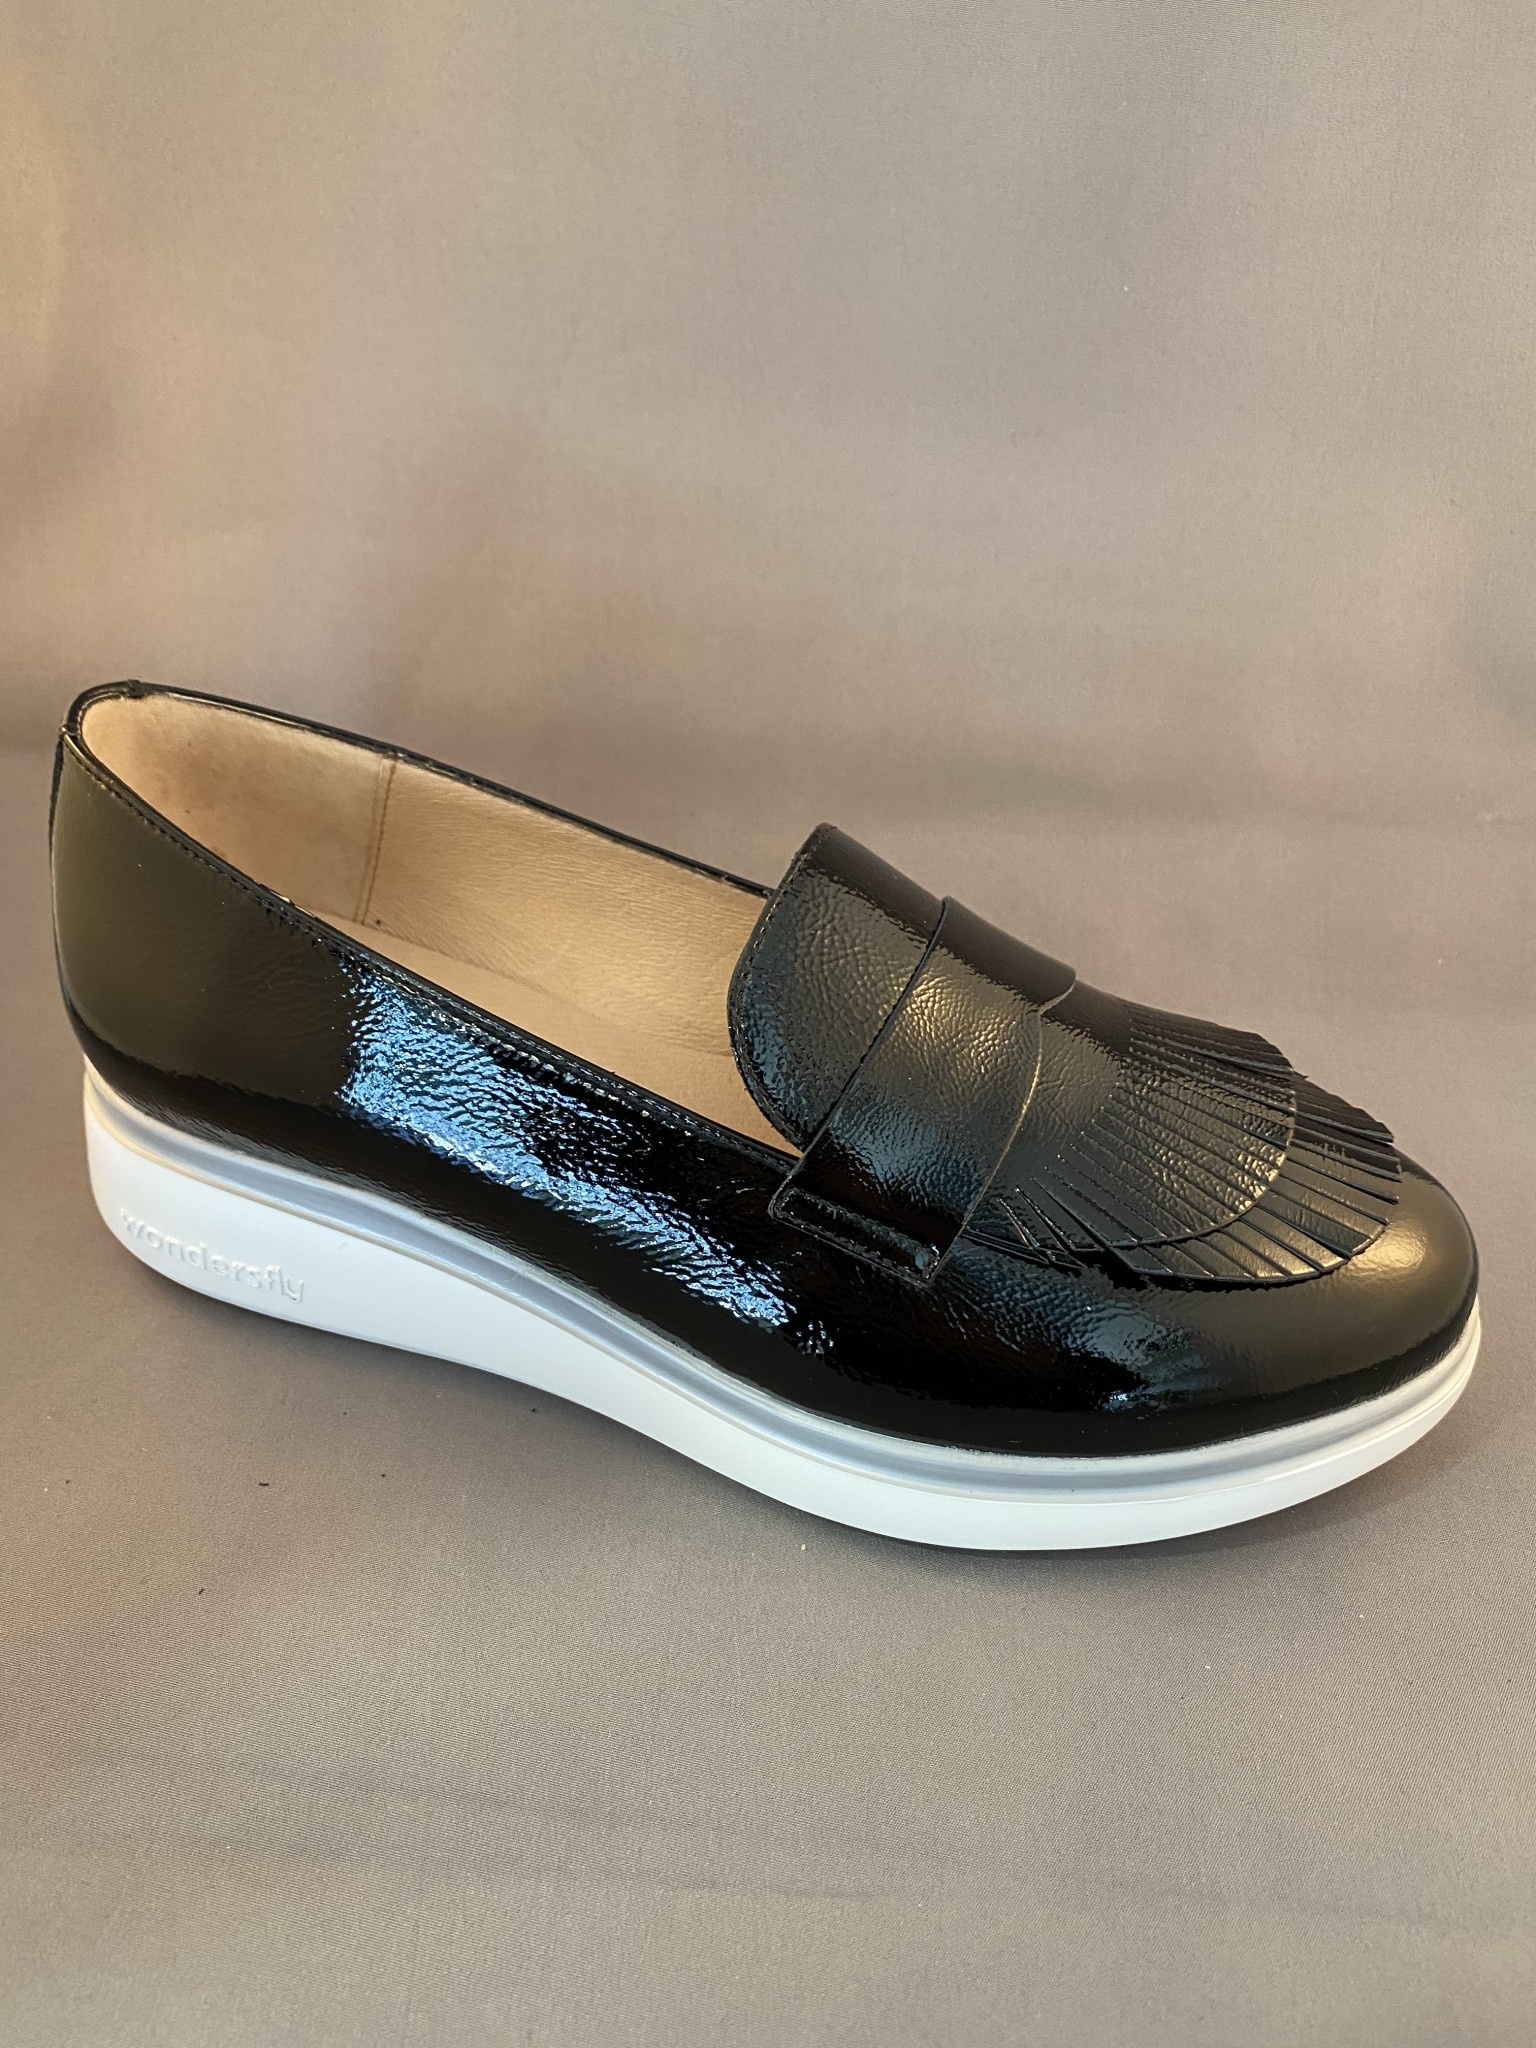 Wonders A 9703 - Alexandria's Shoes for Women